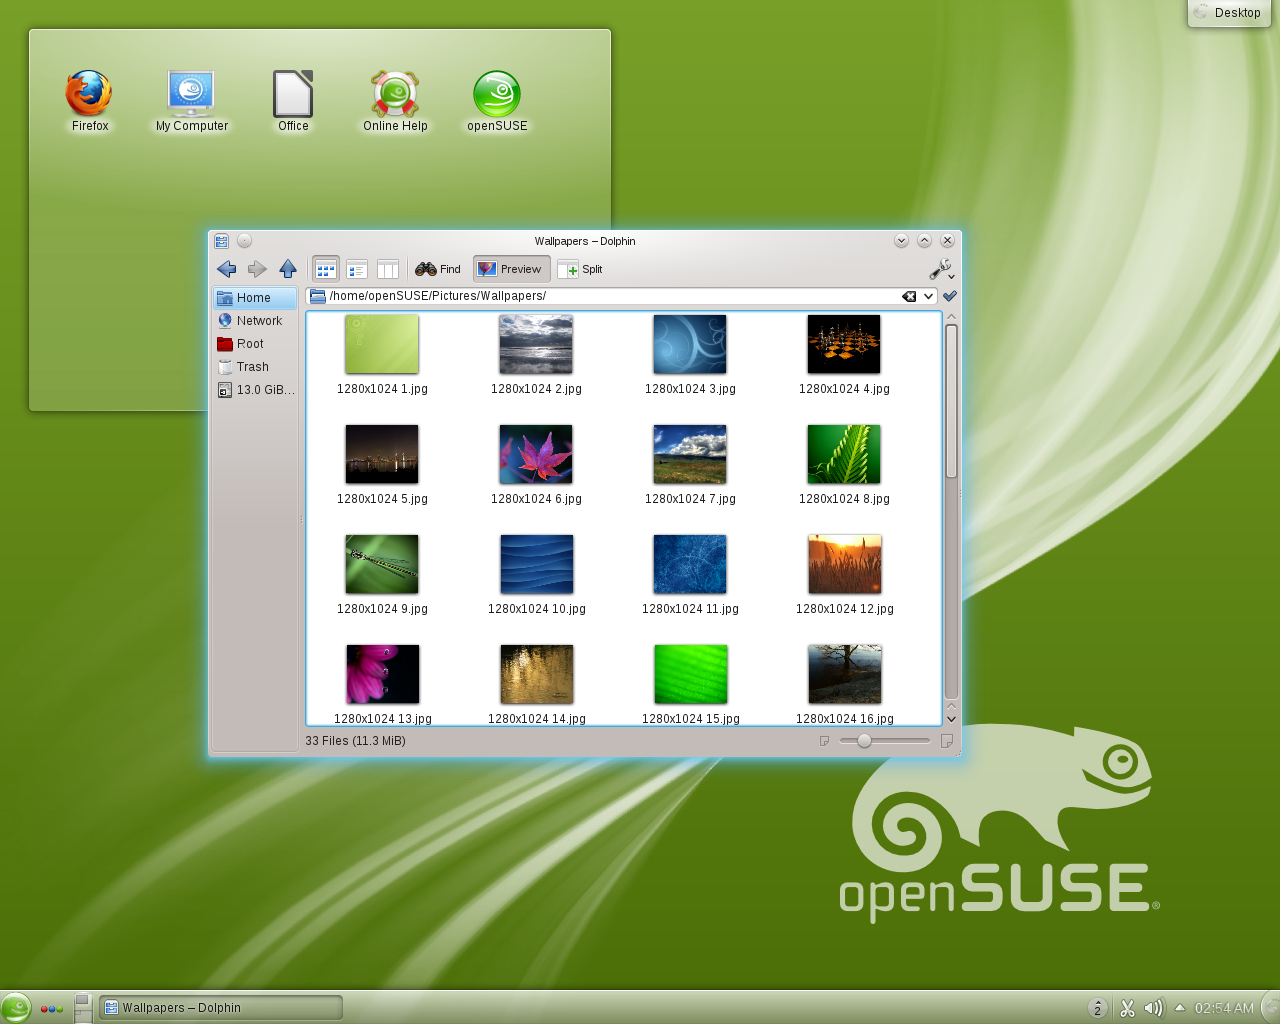 Opensuse-12.1-en-kde-dolphin-preview.png